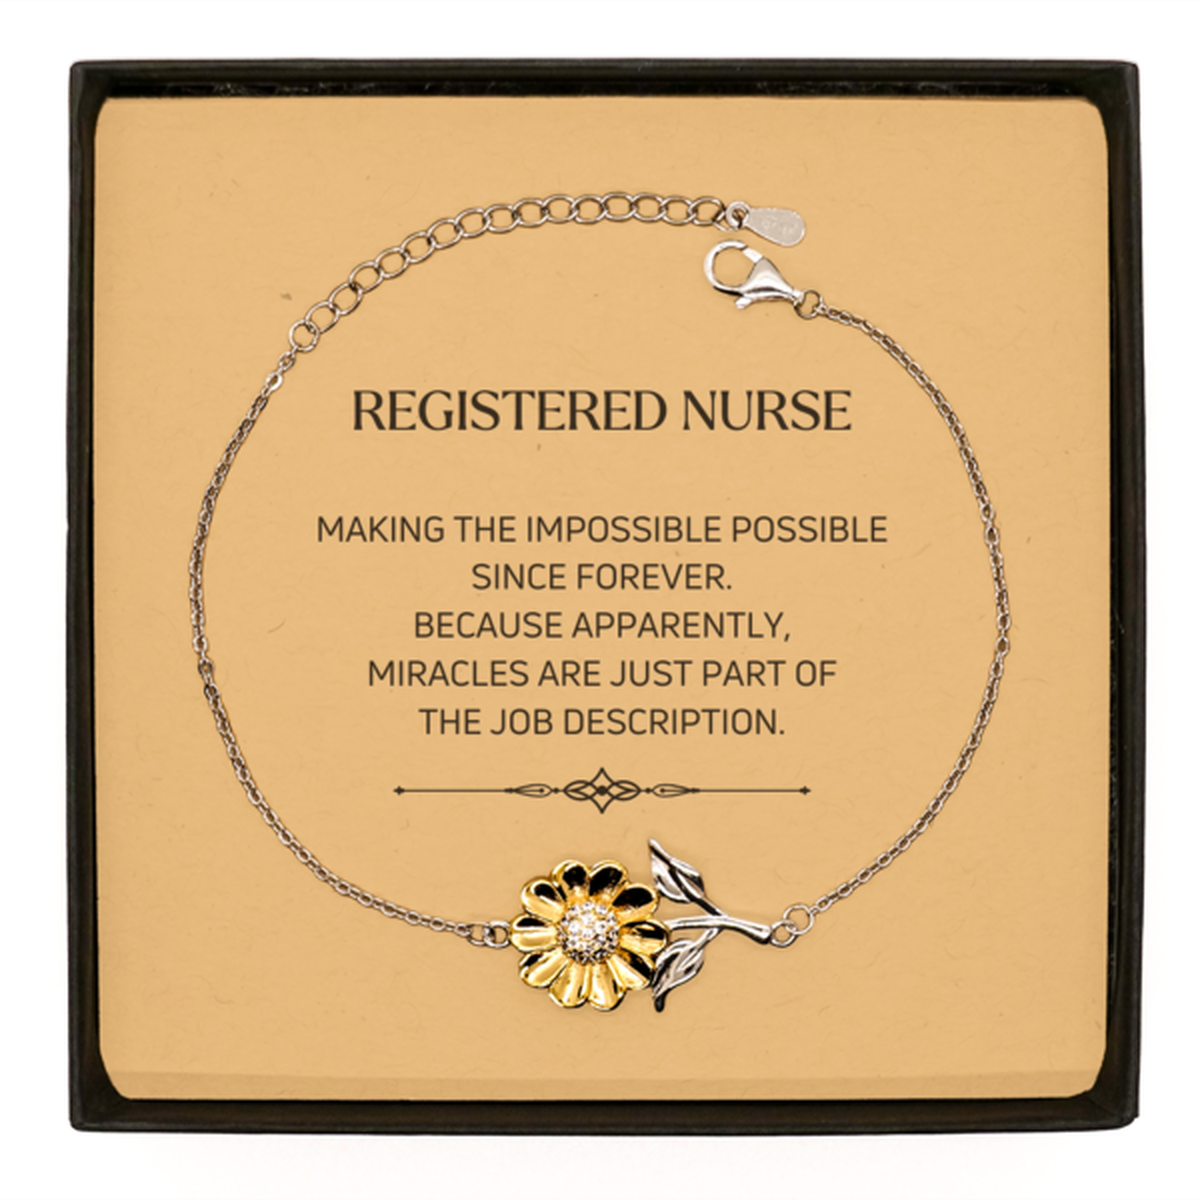 Funny Registered Nurse Gifts, Miracles are just part of the job description, Inspirational Birthday Sunflower Bracelet For Registered Nurse, Men, Women, Coworkers, Friends, Boss